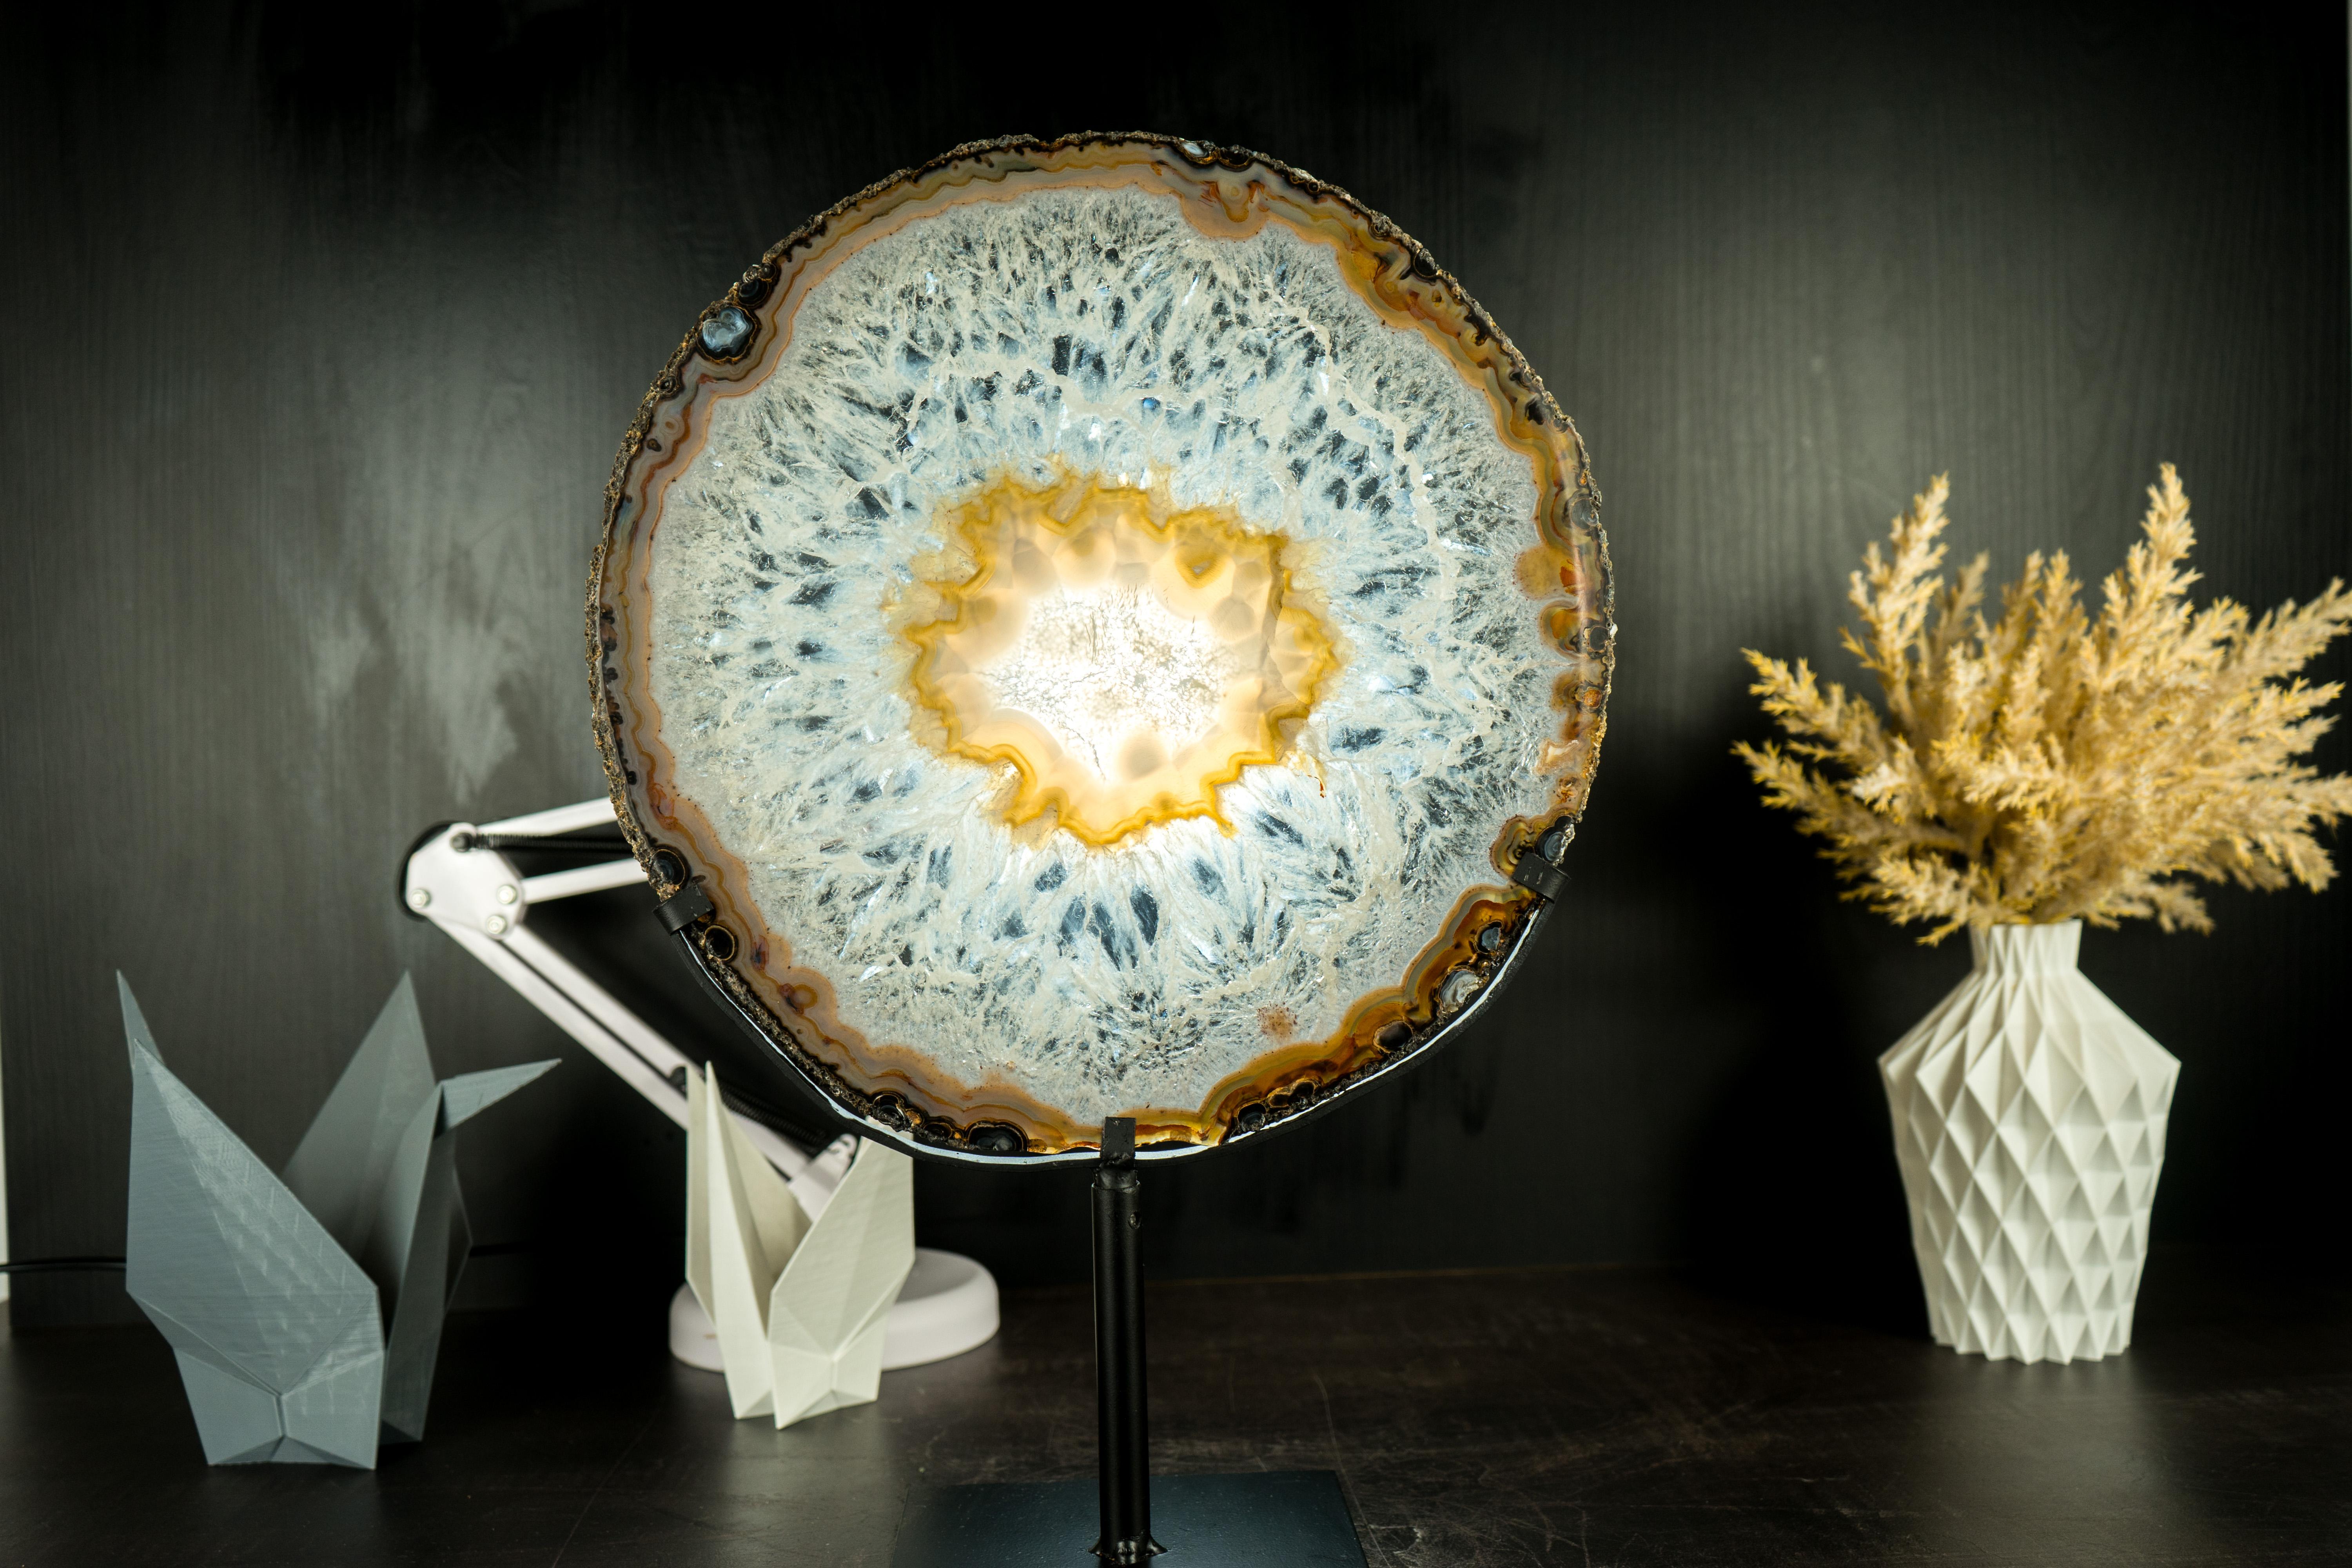 Gallery Grade Large Lace Agate Slice, with Ice-Like Crystal and Colorful Agate 1